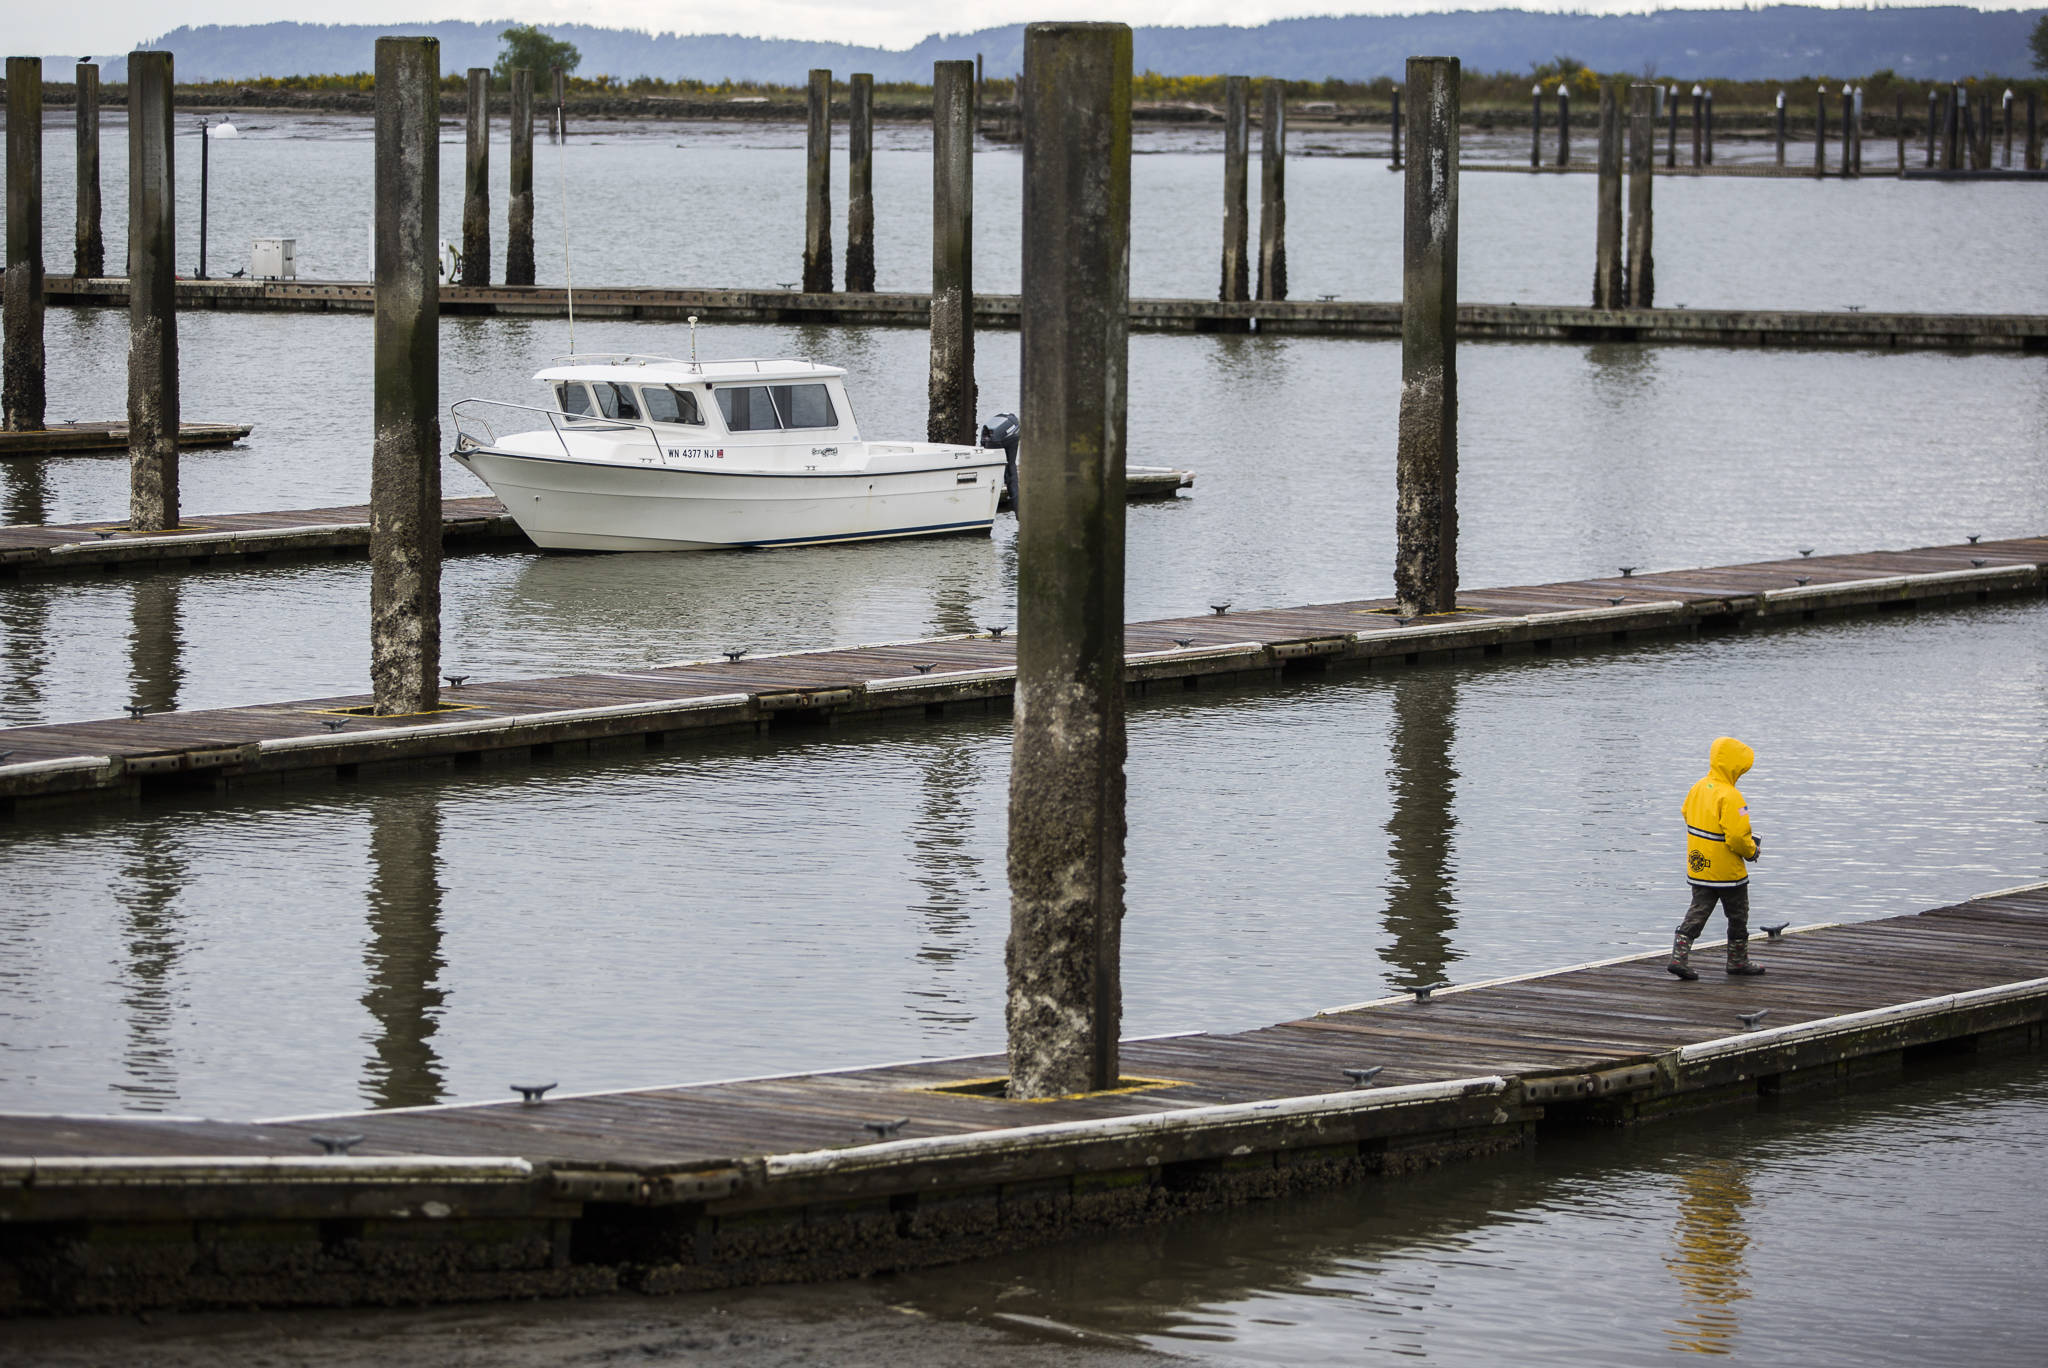 A boy walks along one of the empty docks at the 10th Street Boat Launch which is open to the public Monday in Everett. (Olivia Vanni / The Herald)